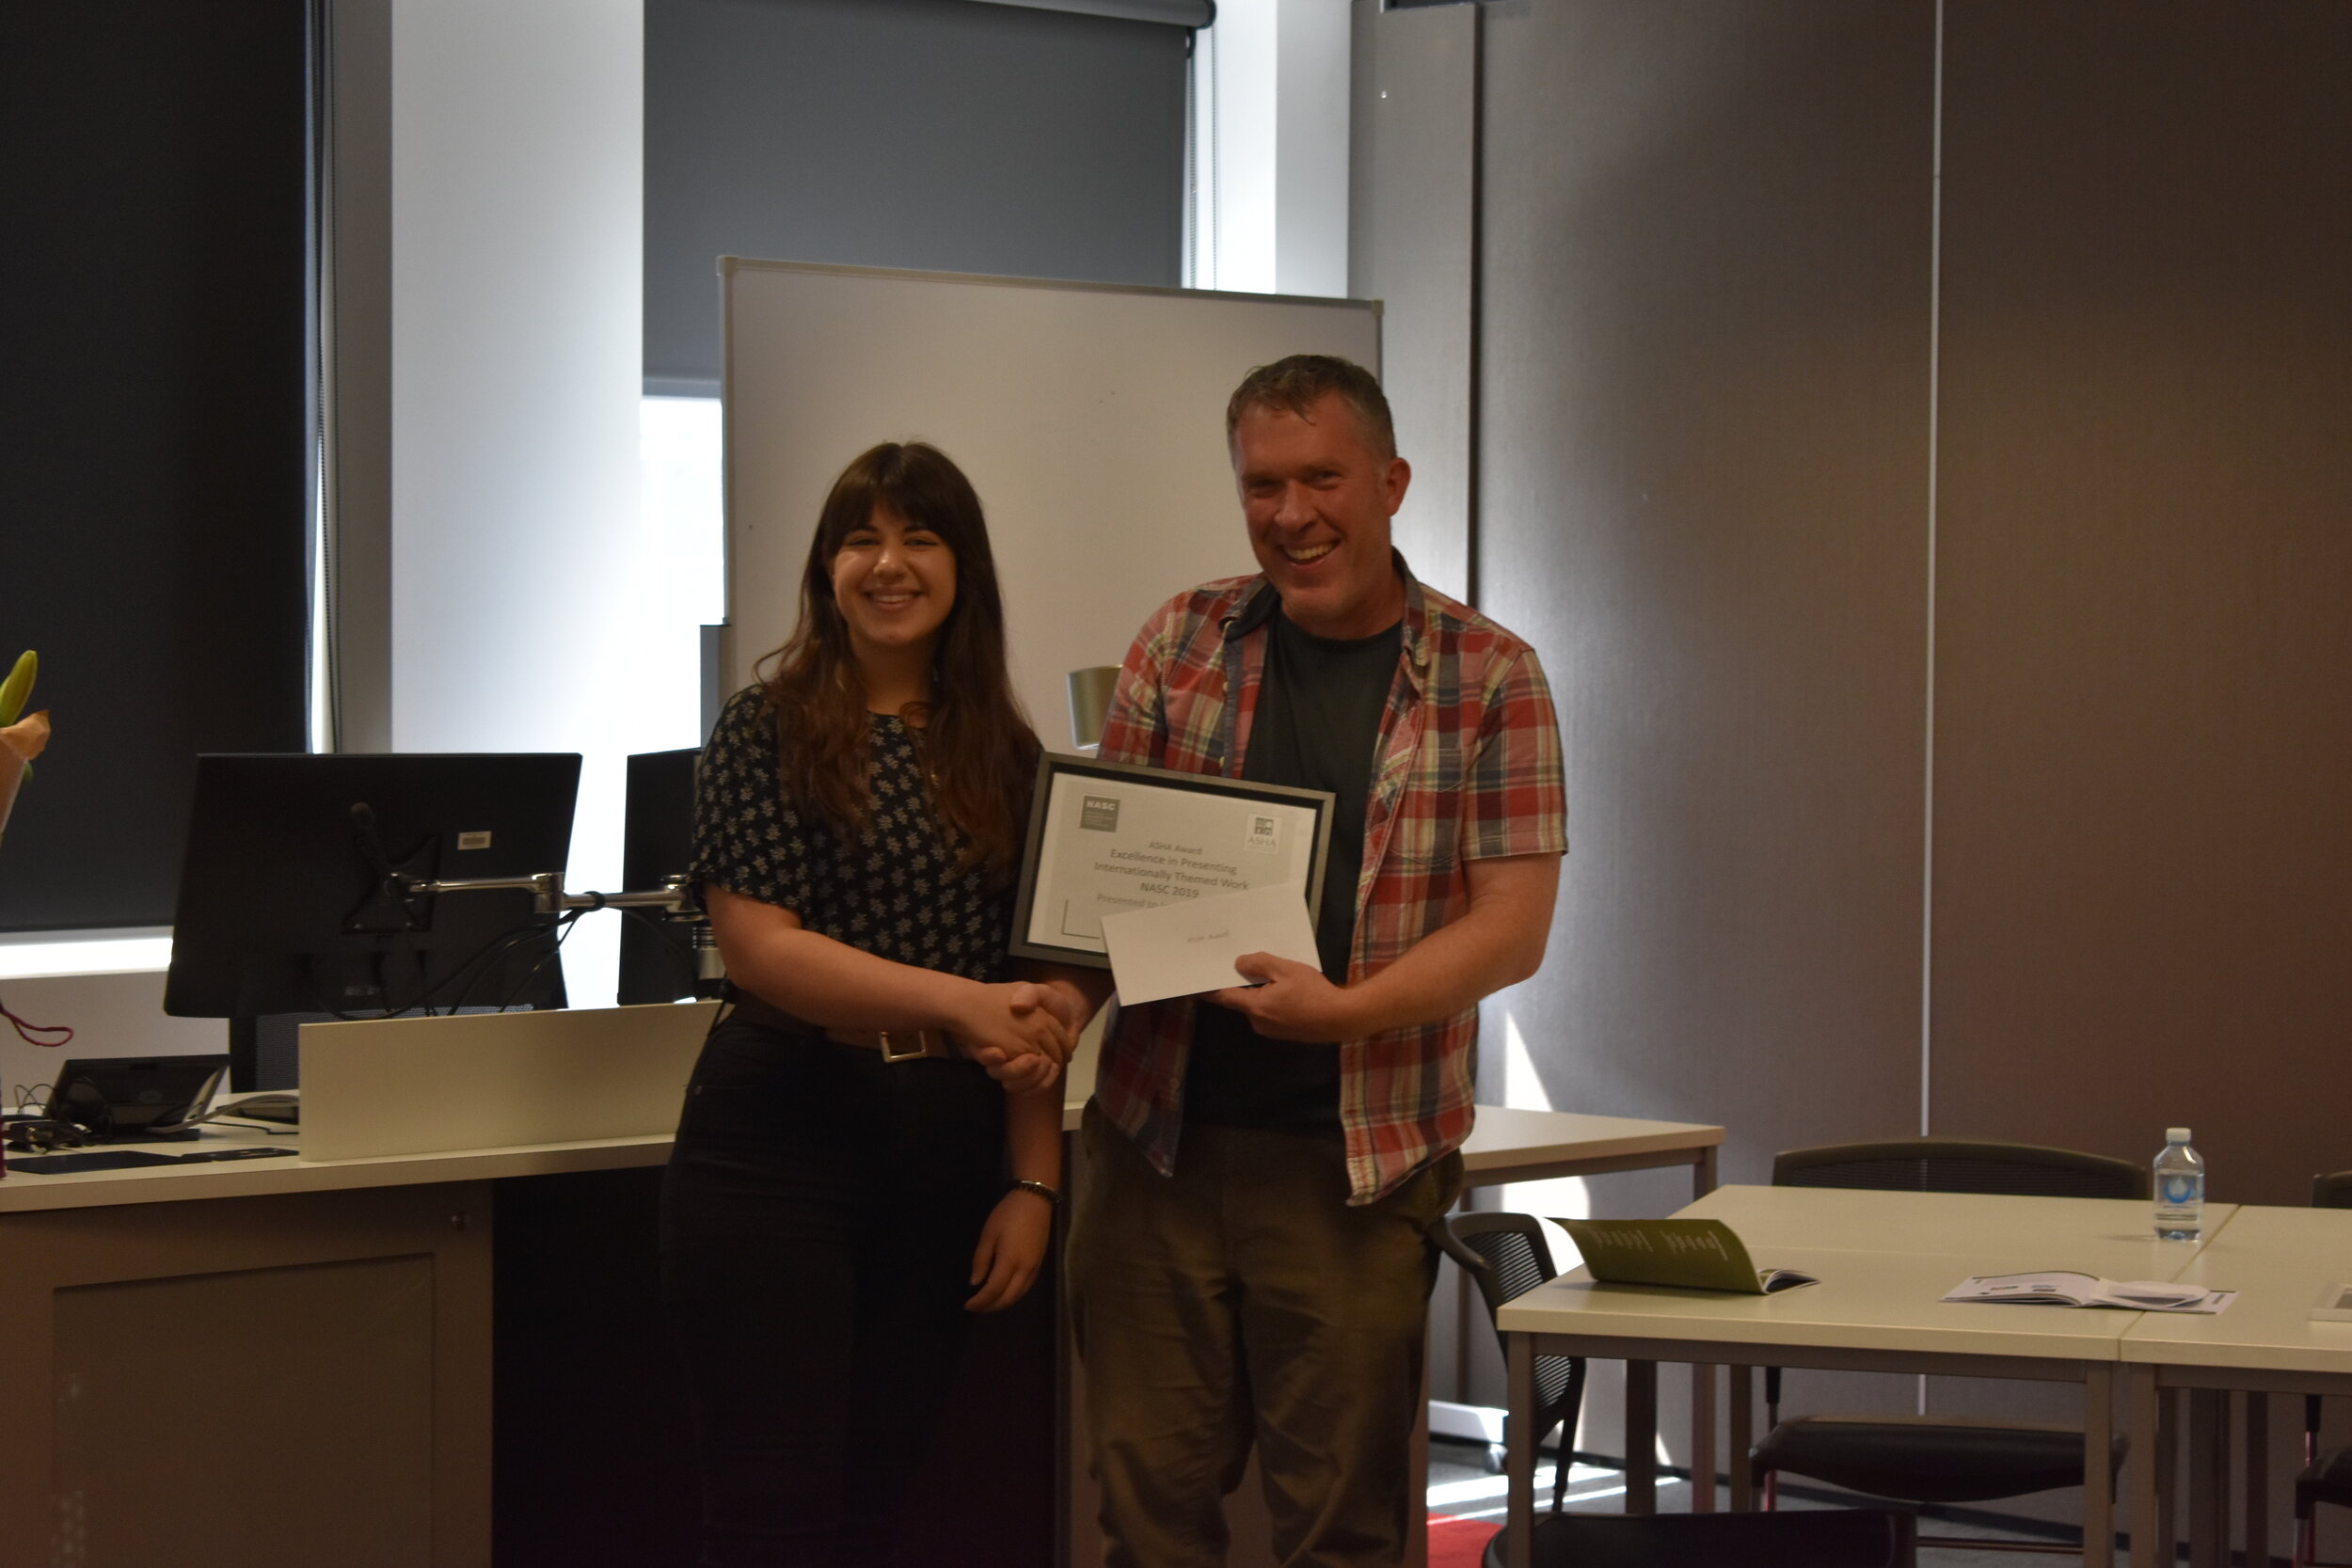 Iona Claringbold, Recipient of the Australian Society for Historical Archaeology Award for excellence in presenting internationally themed research, receiving from Richard Osgood